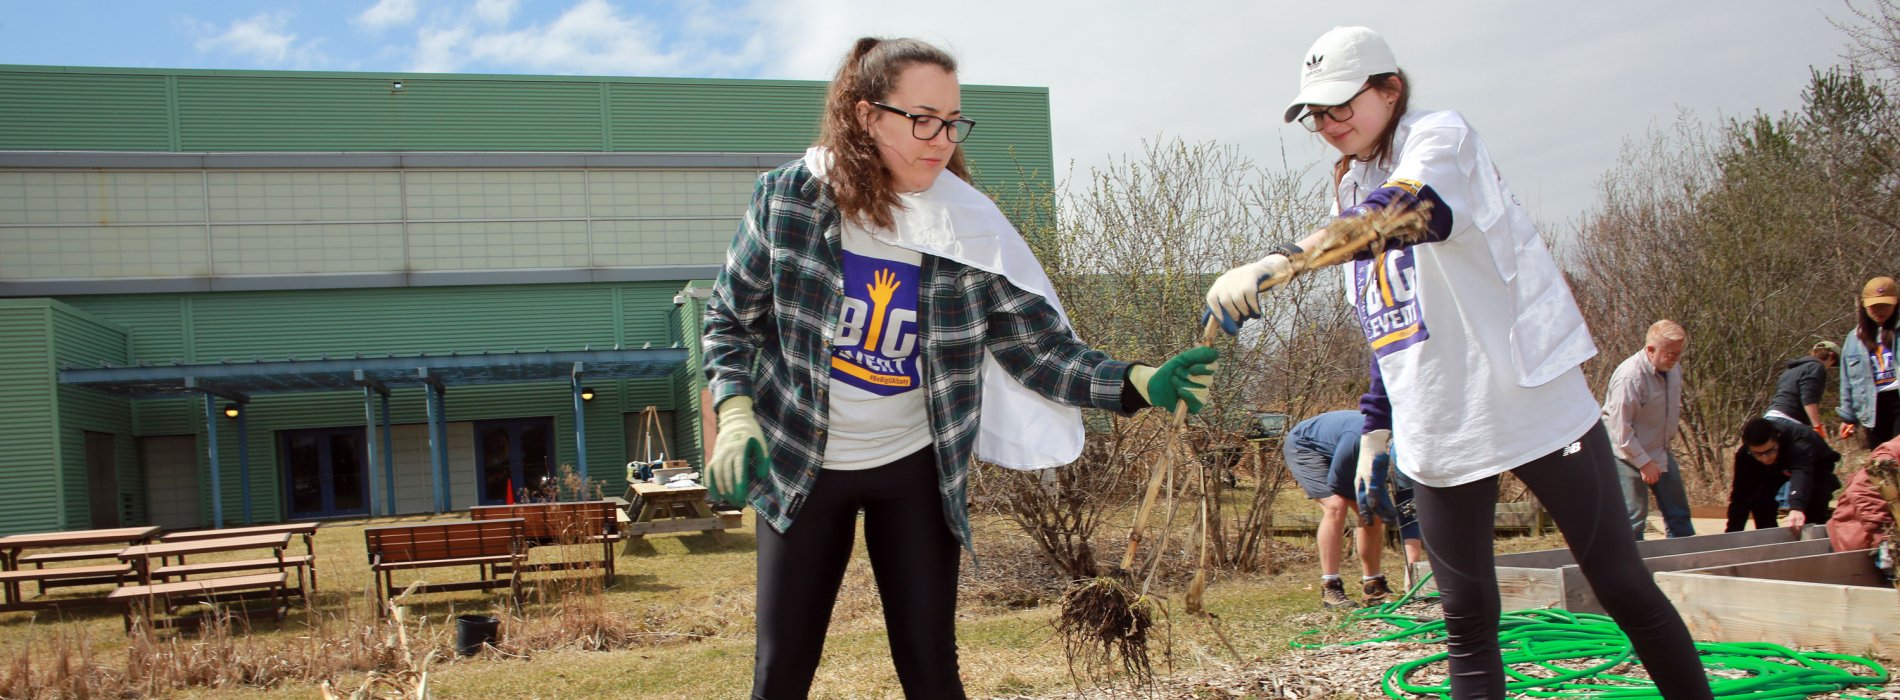 Two students wearing The Big Event t-shirts and gardening gloves work outside clearing a public garden of dead weeds.